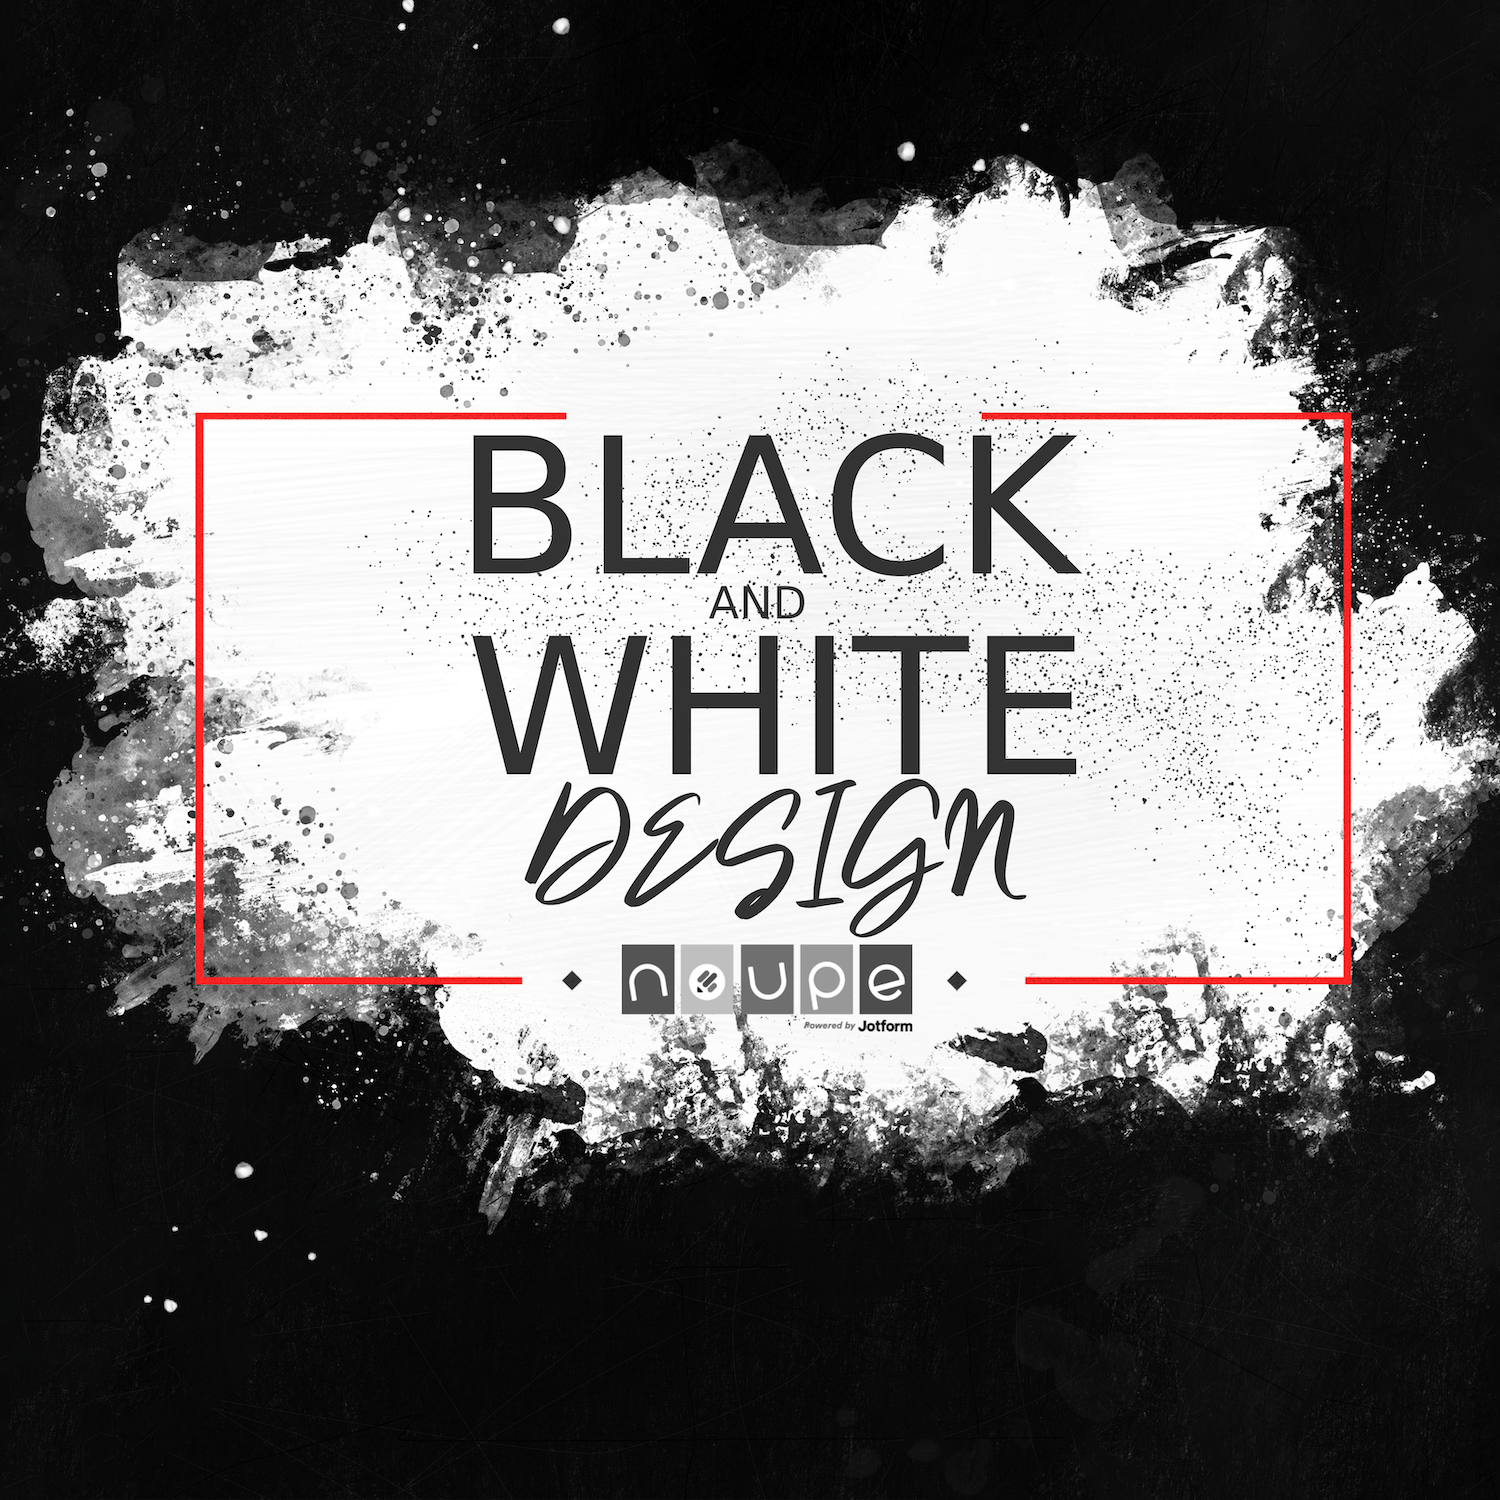 Black and white style: Concept Creator designer showed concept